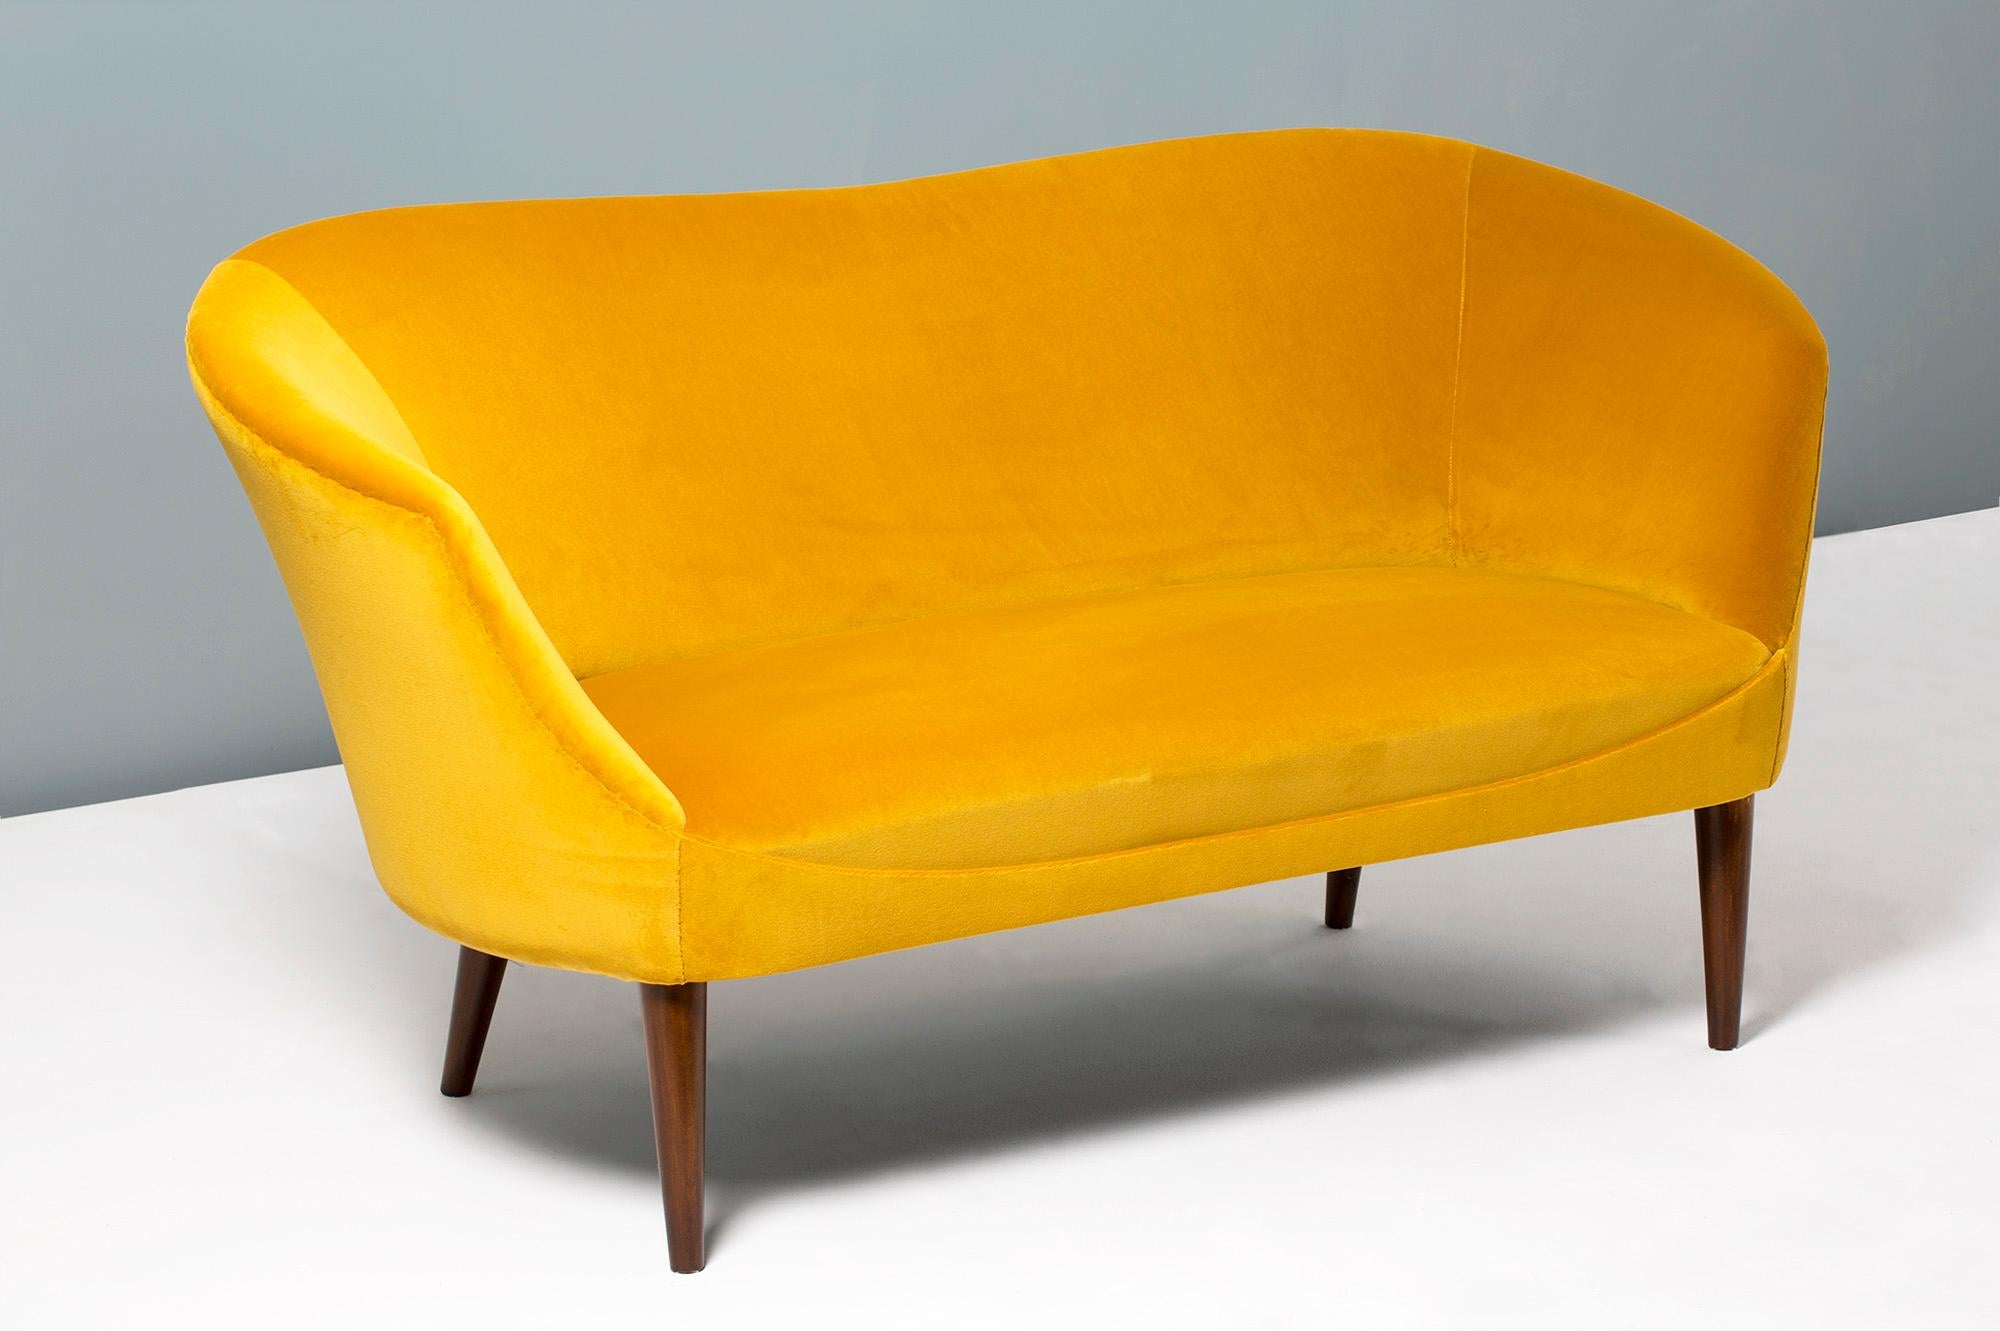 Swedish-made love seat, circa 1940s.

This compact Art Deco inspired sofa bench was produced in Sweden between the 1940s and 1950s. It has been fully restored and reupholstered in our London workshop. The legs are stained beech and the sofa body